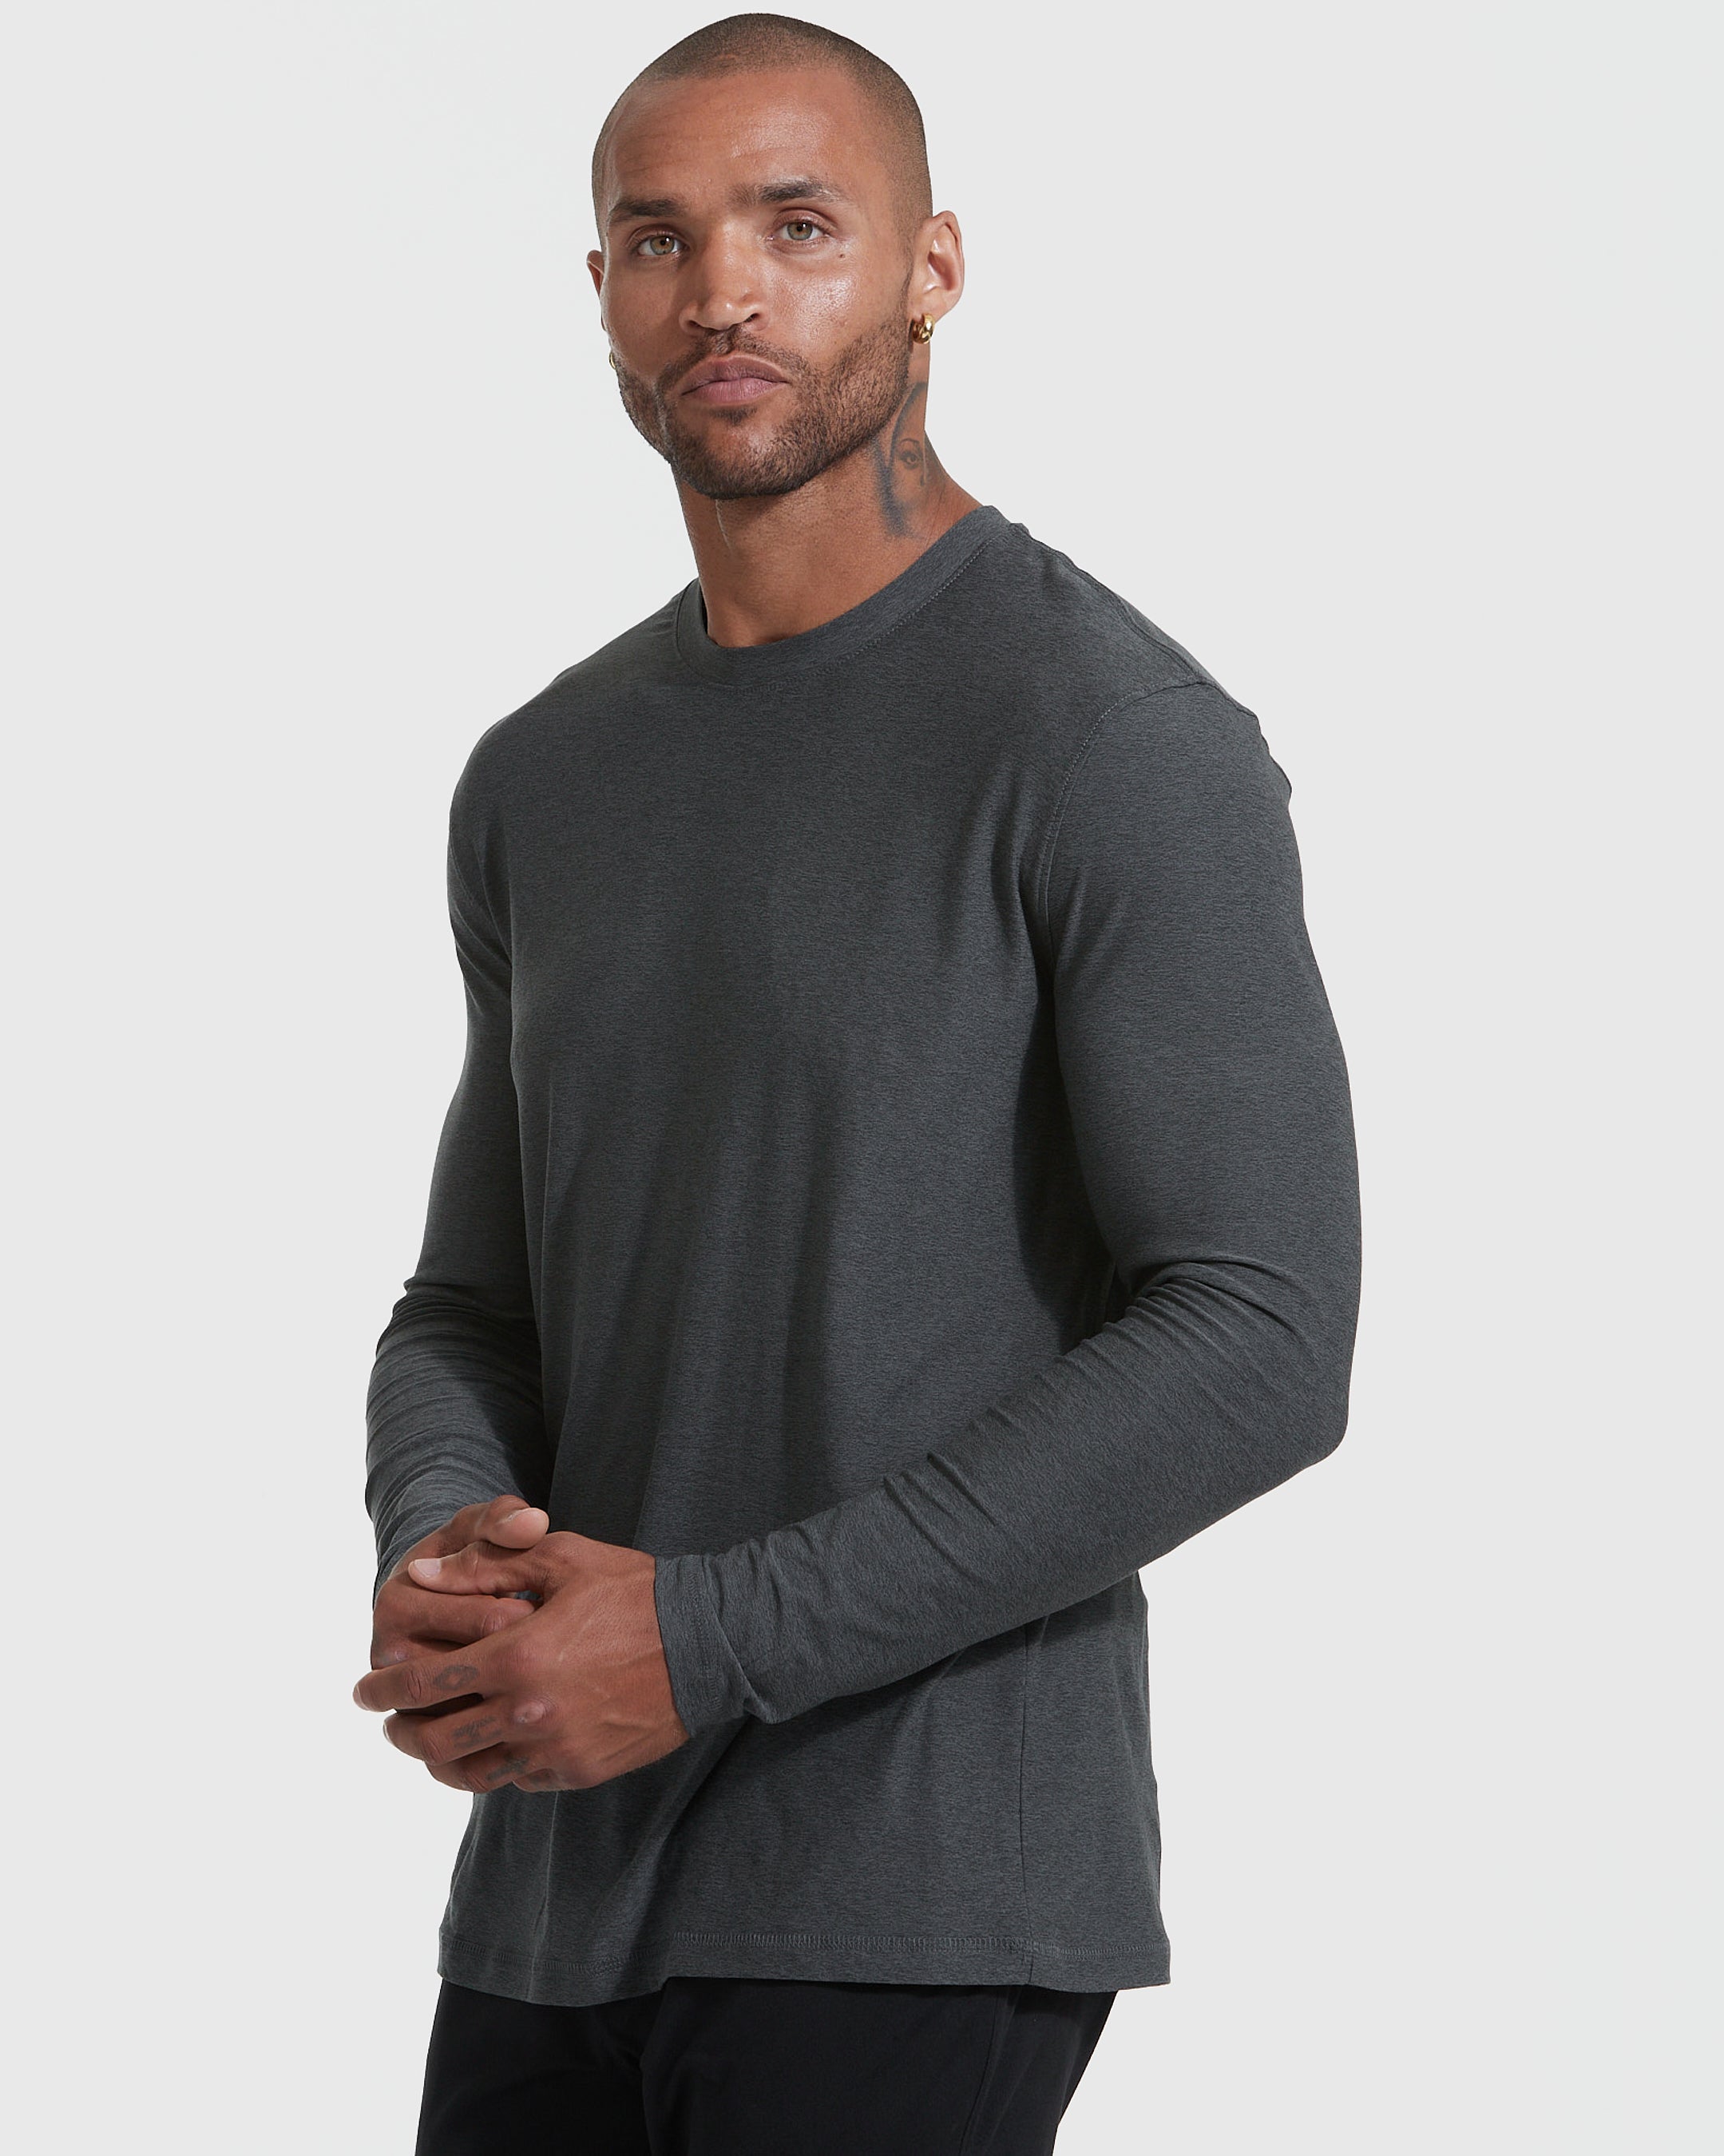 Heather Color Active Long Sleeve Crew 3-Pack | Heather Color Active ...